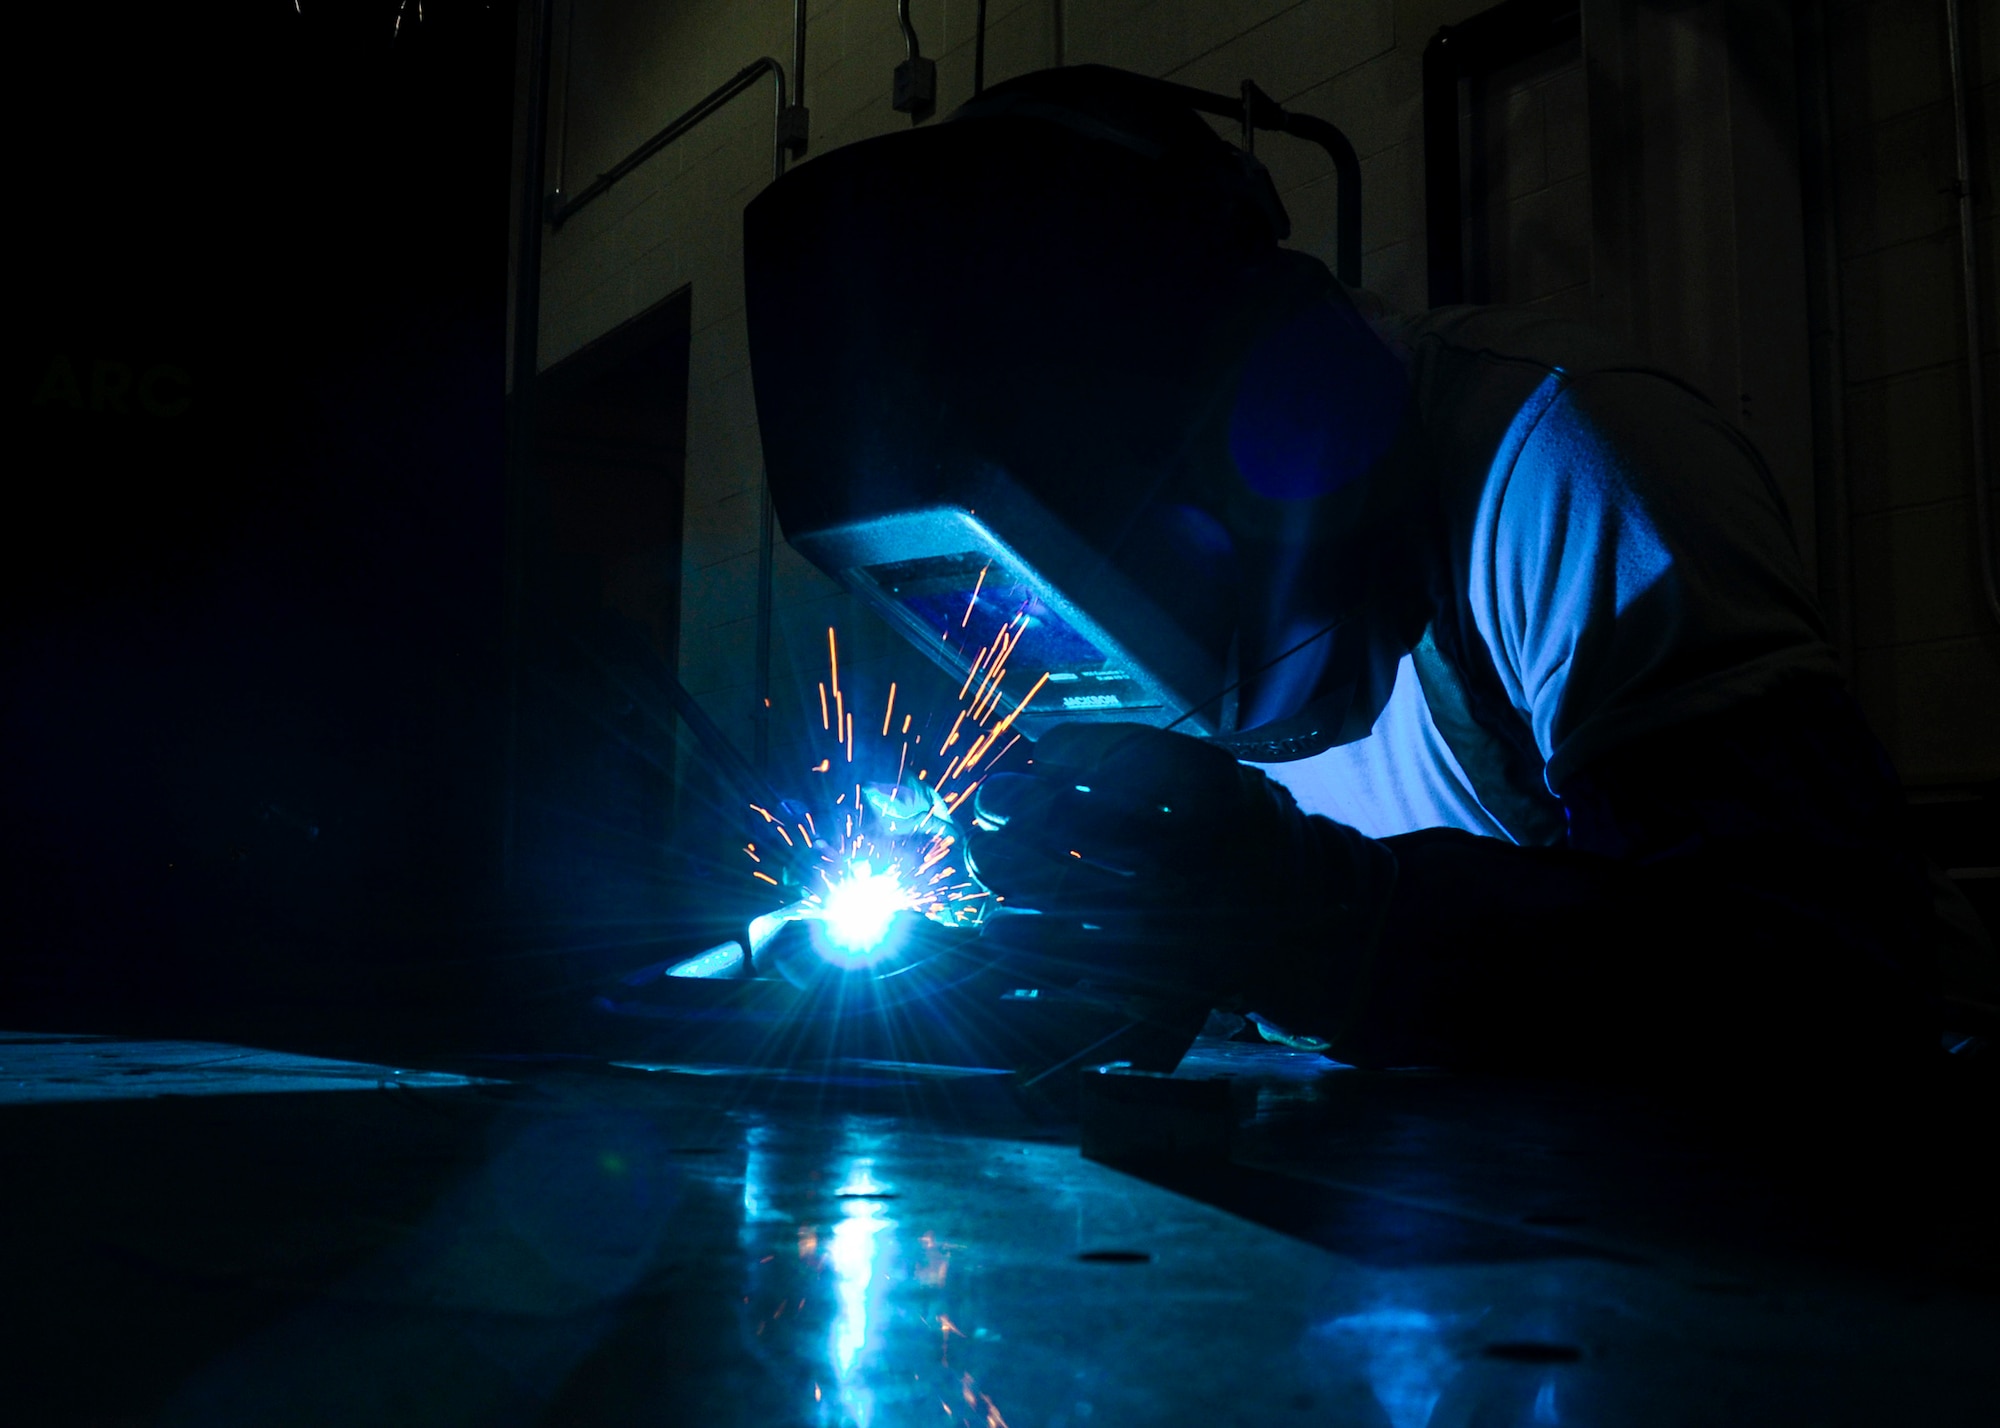 Tech. Sgt. Tyler L. Williams, 445th Maintenance Squadron, operates a tungsten inert gas welder at the metal technologies shop here Aug. 4, 2019. Williams is repairing damaged metal by using high amperage electrical current and melted tungsten to fuse the broken steel pieces, essentially “gluing” the tough materials together. (U.S. Air Force photo/Staff Sgt. Ethan Spickler)